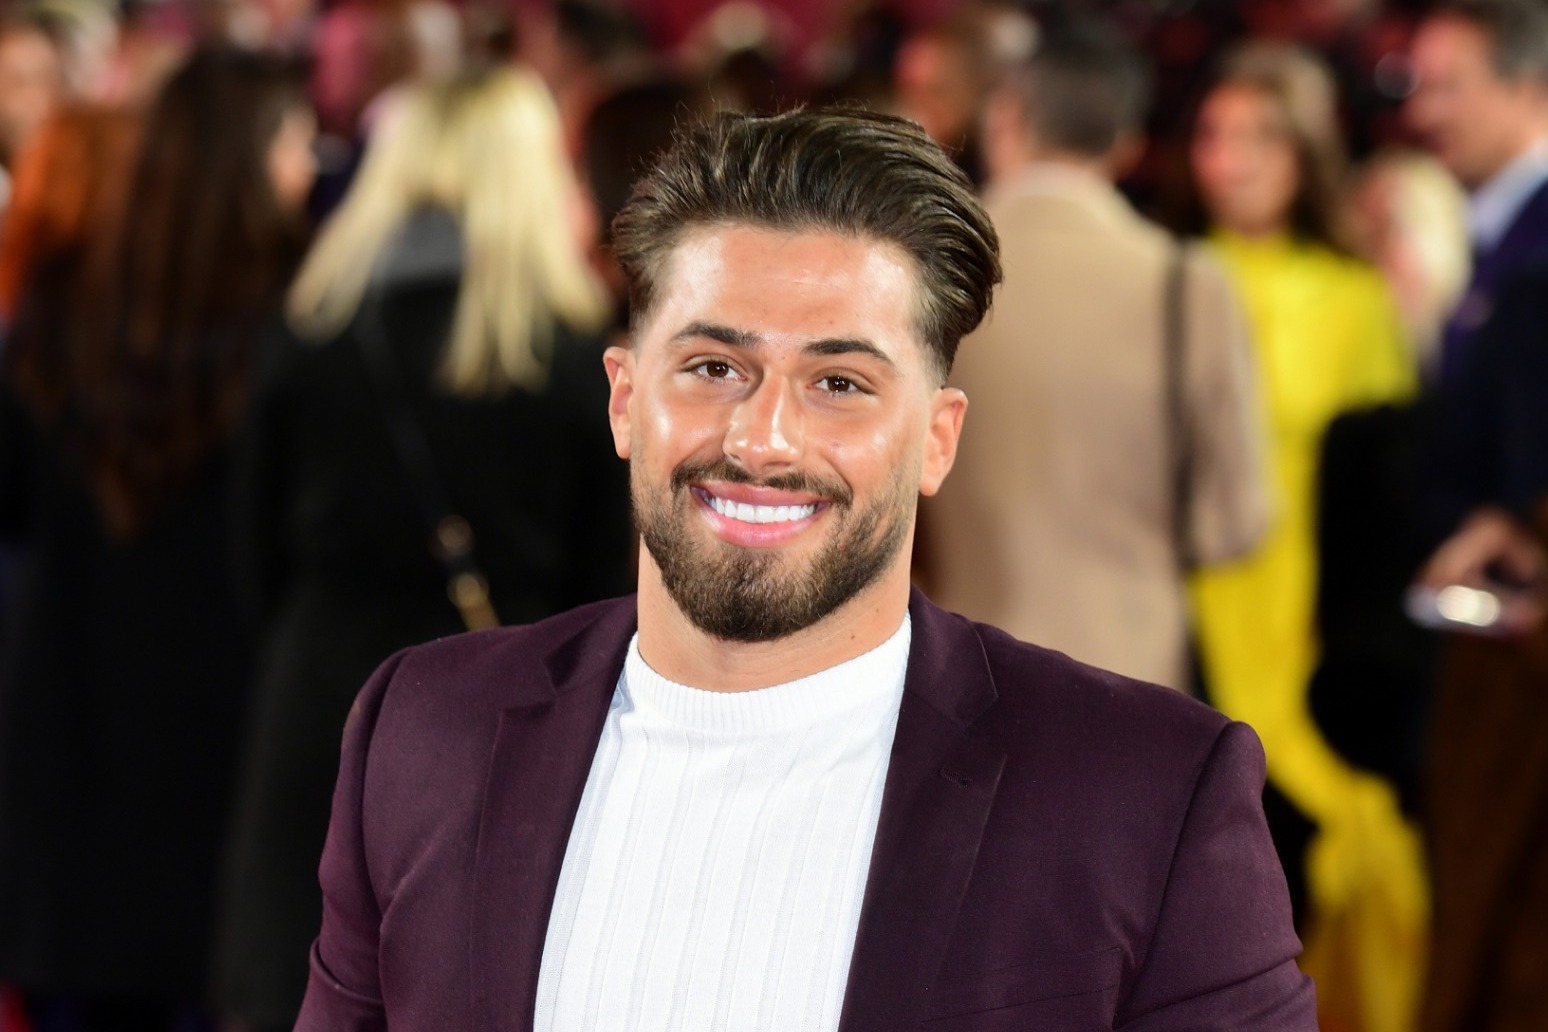 Love Island star Kem Cetinay helping police after involvement in fatal collision 